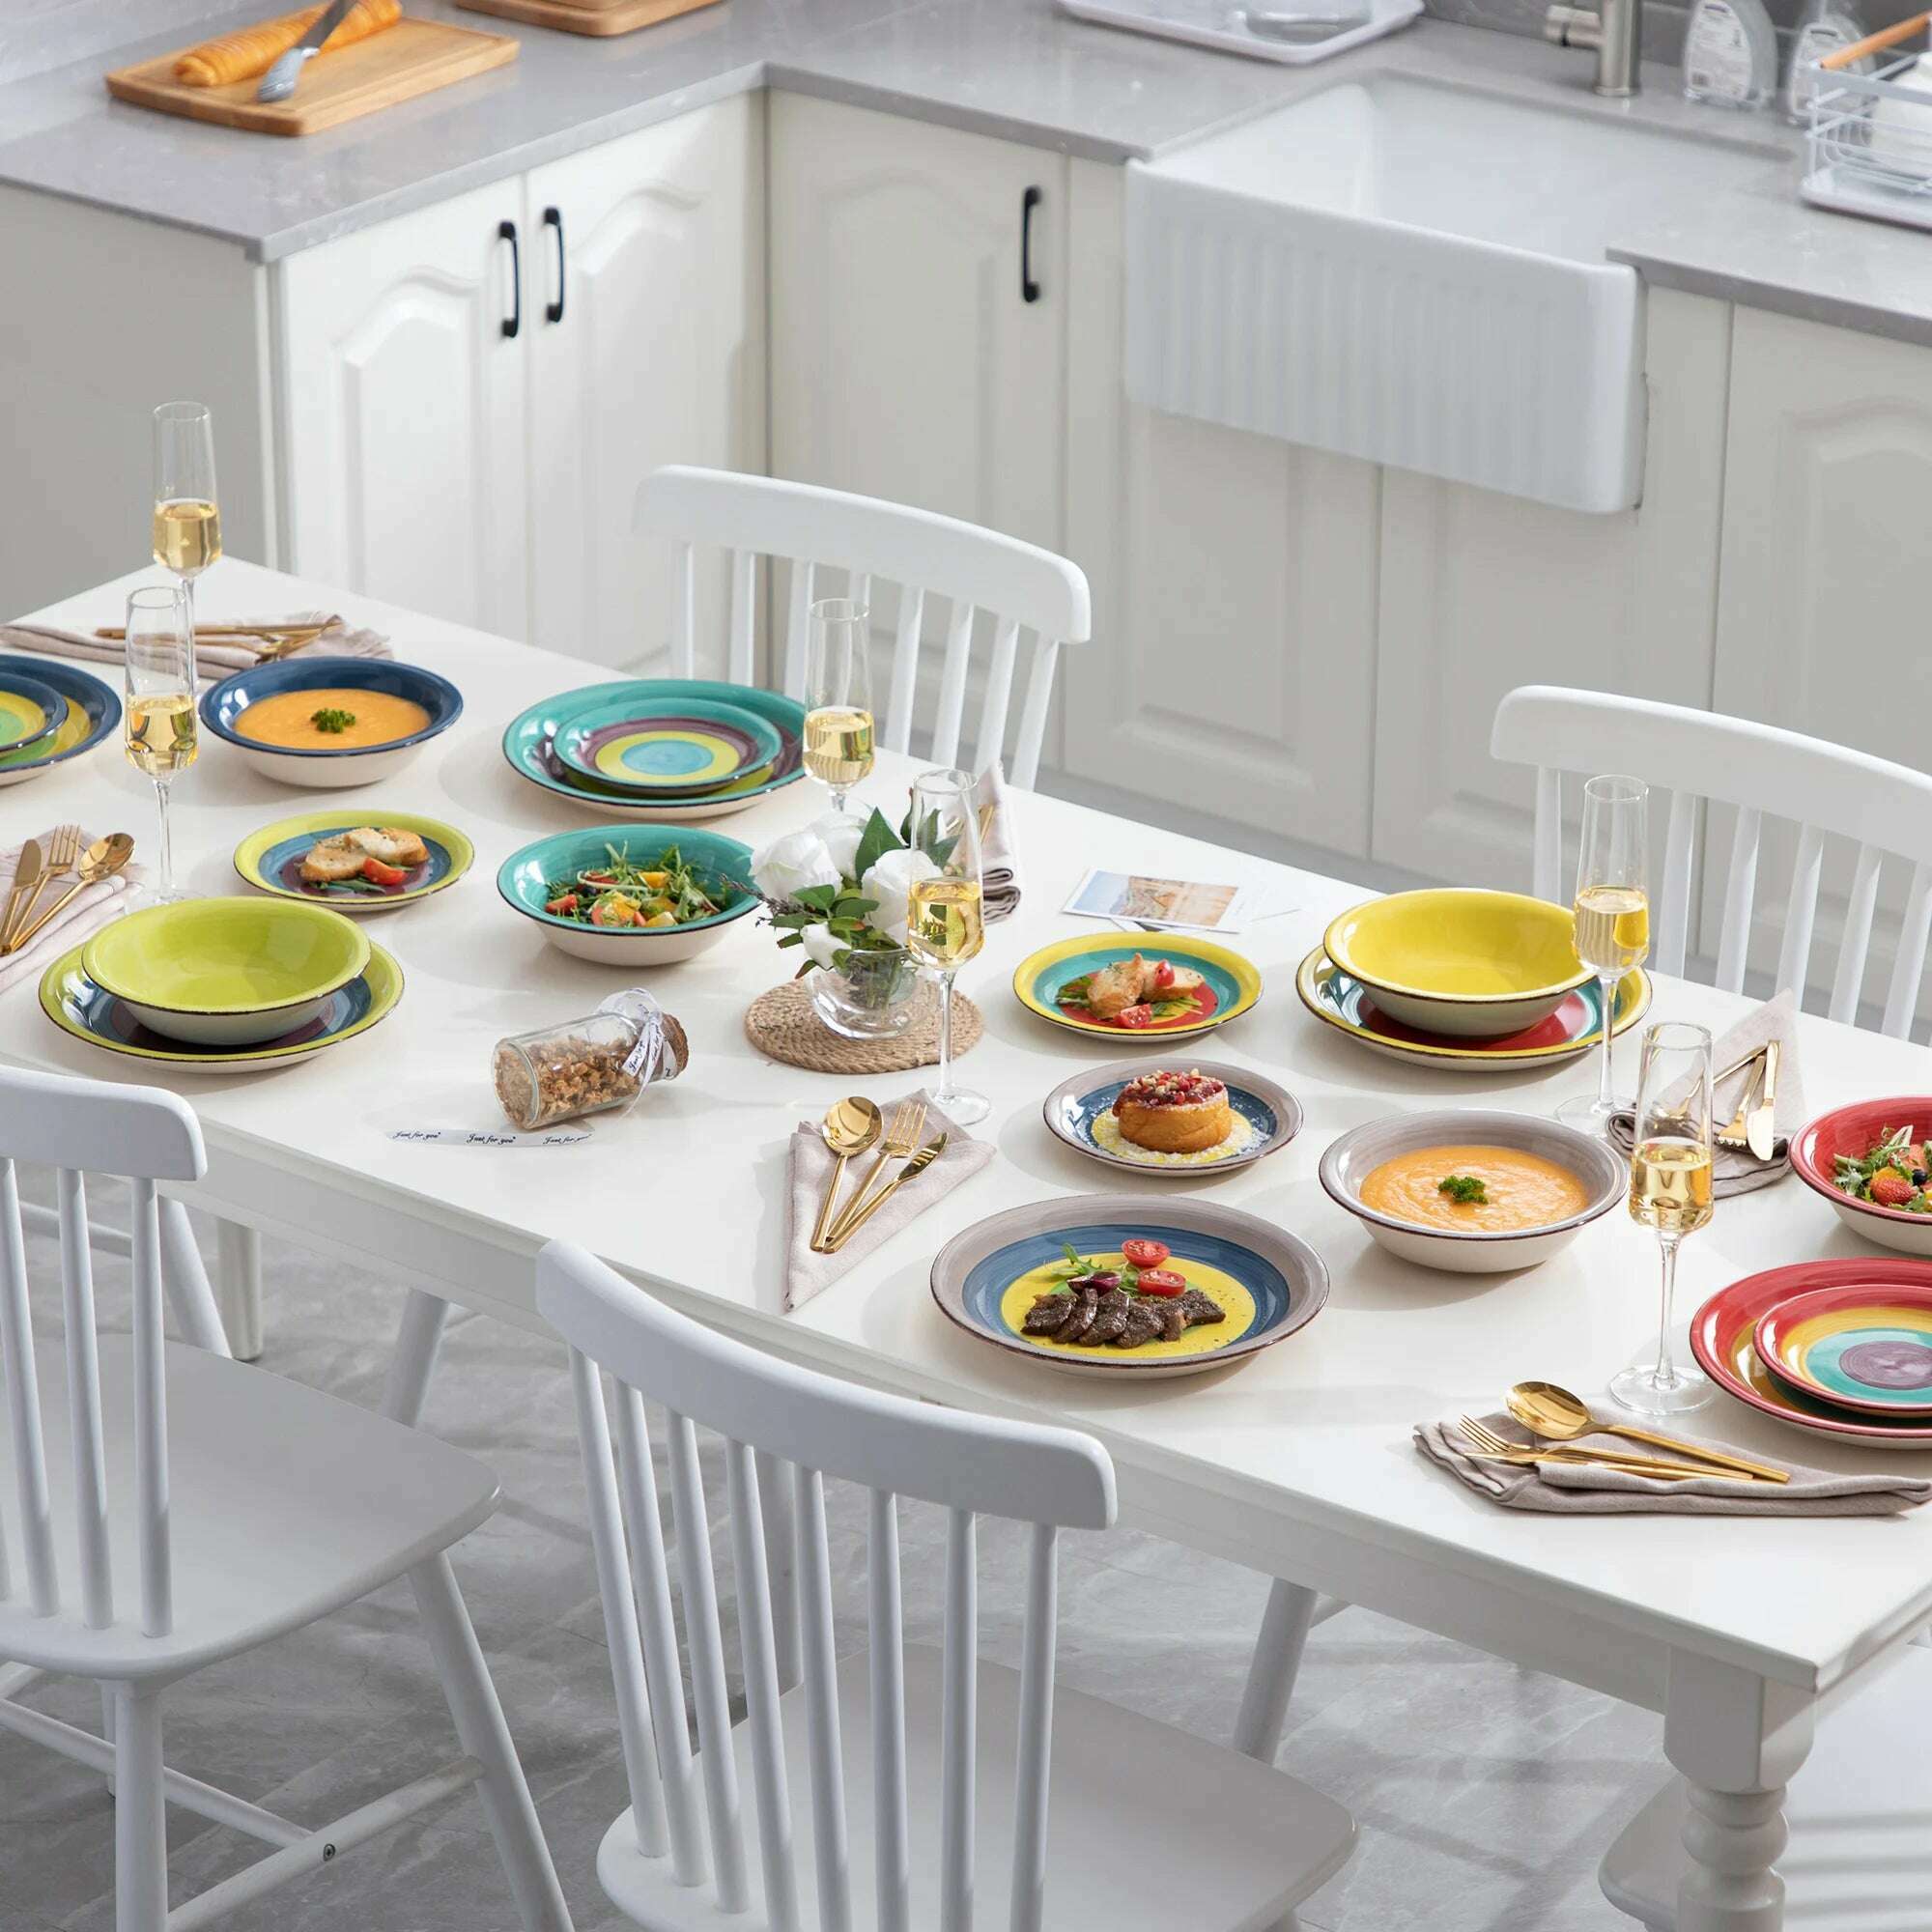 KIMLUD, New Vancasso Arco 18-Piece Ceramic Tableware Set Handpainted Spiral and Alternately Colourful Pattern Stoneware Dinner Set for 6, KIMLUD Womens Clothes